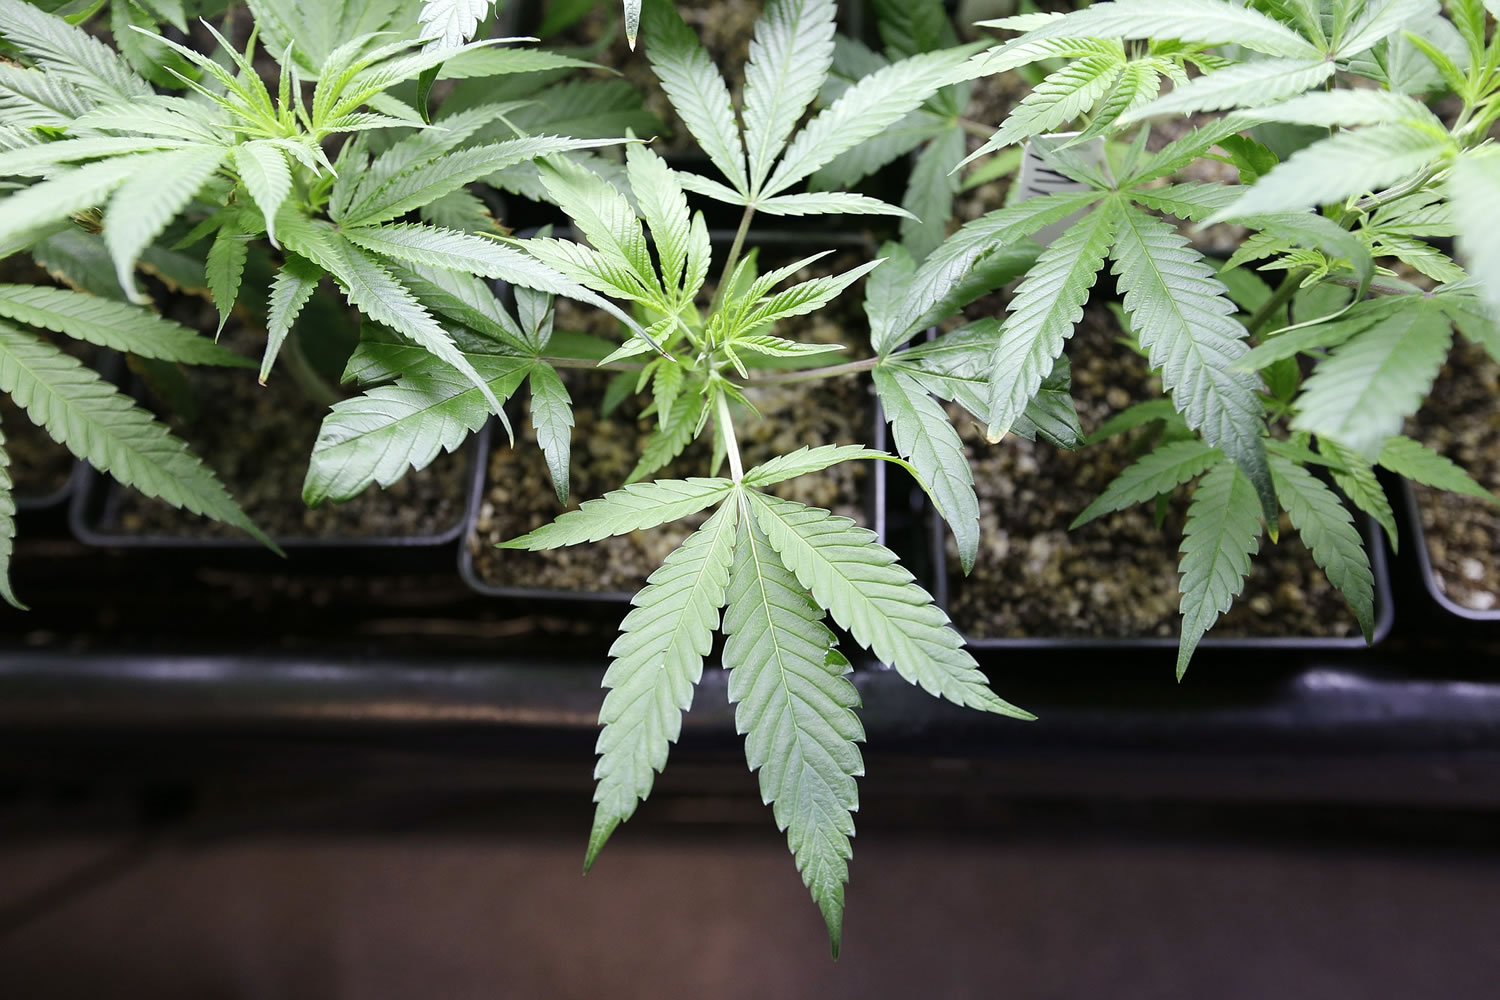 Marijuana plant starts are seen in early April at a growing facility in Seattle.